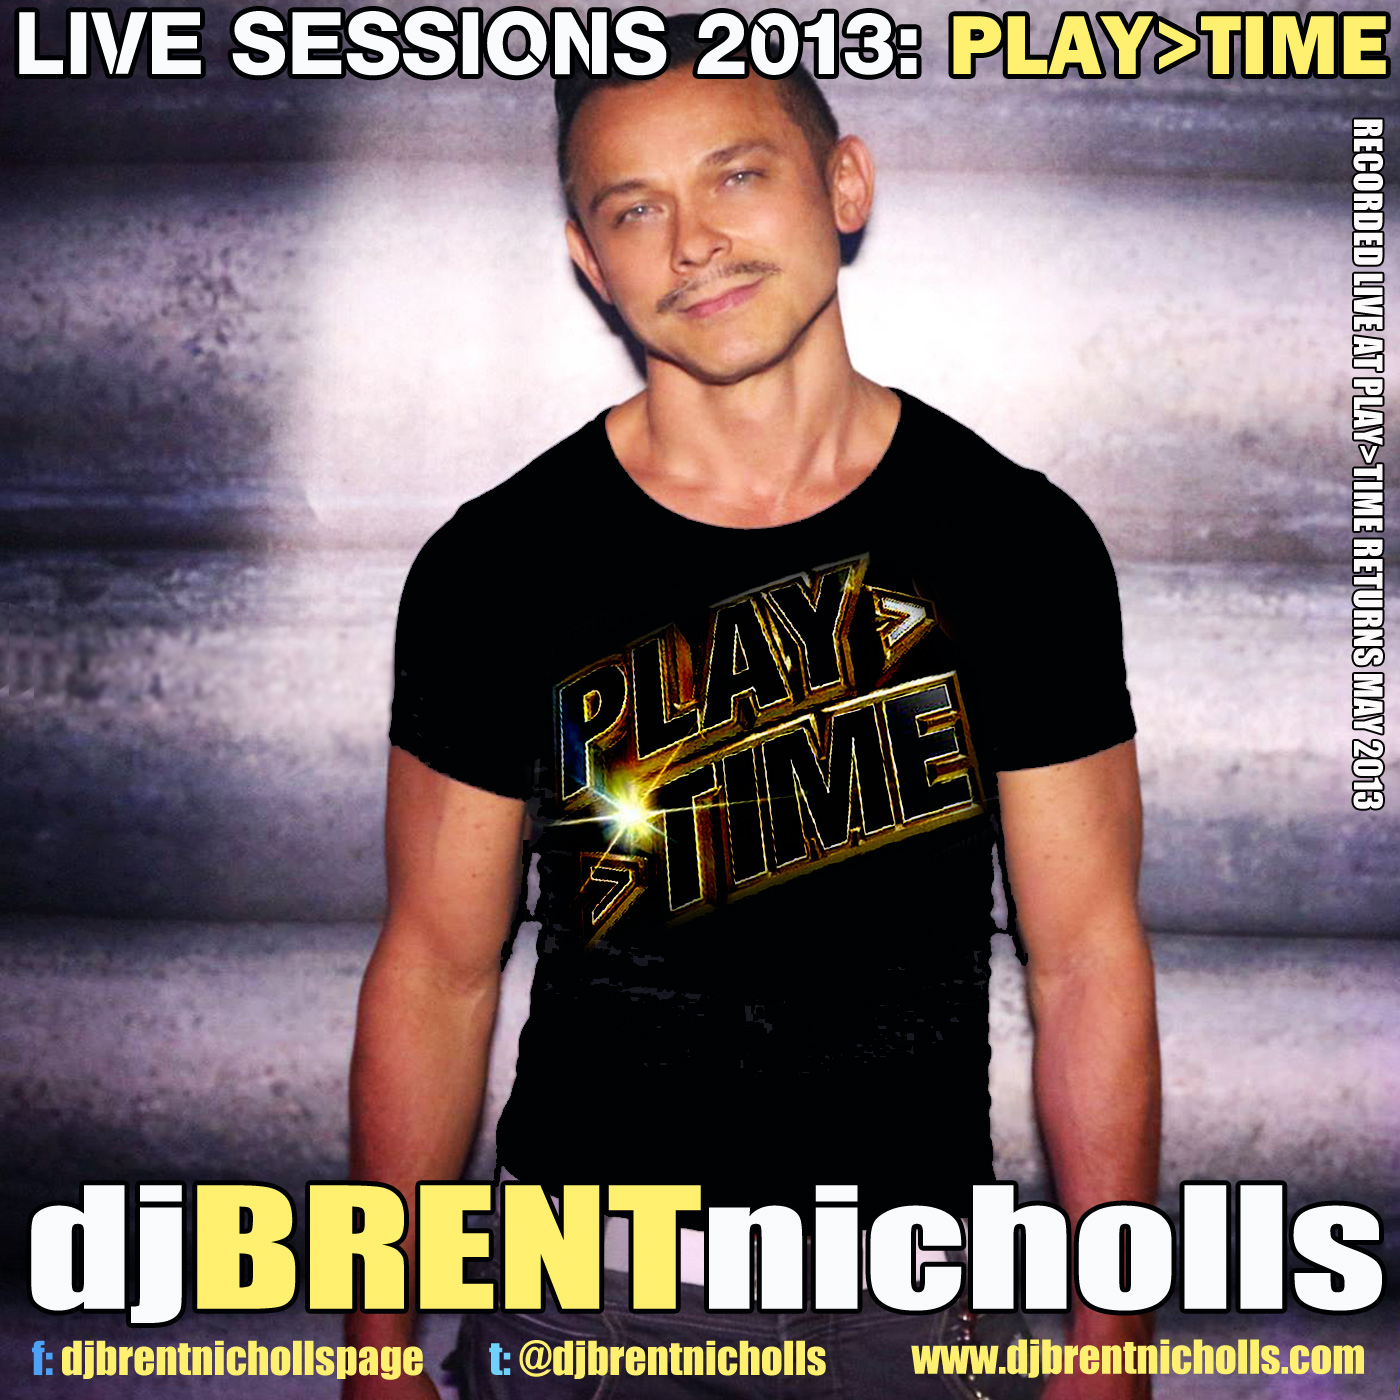 LIVE SESSIONS 2013: PLAYTIME RETURNS